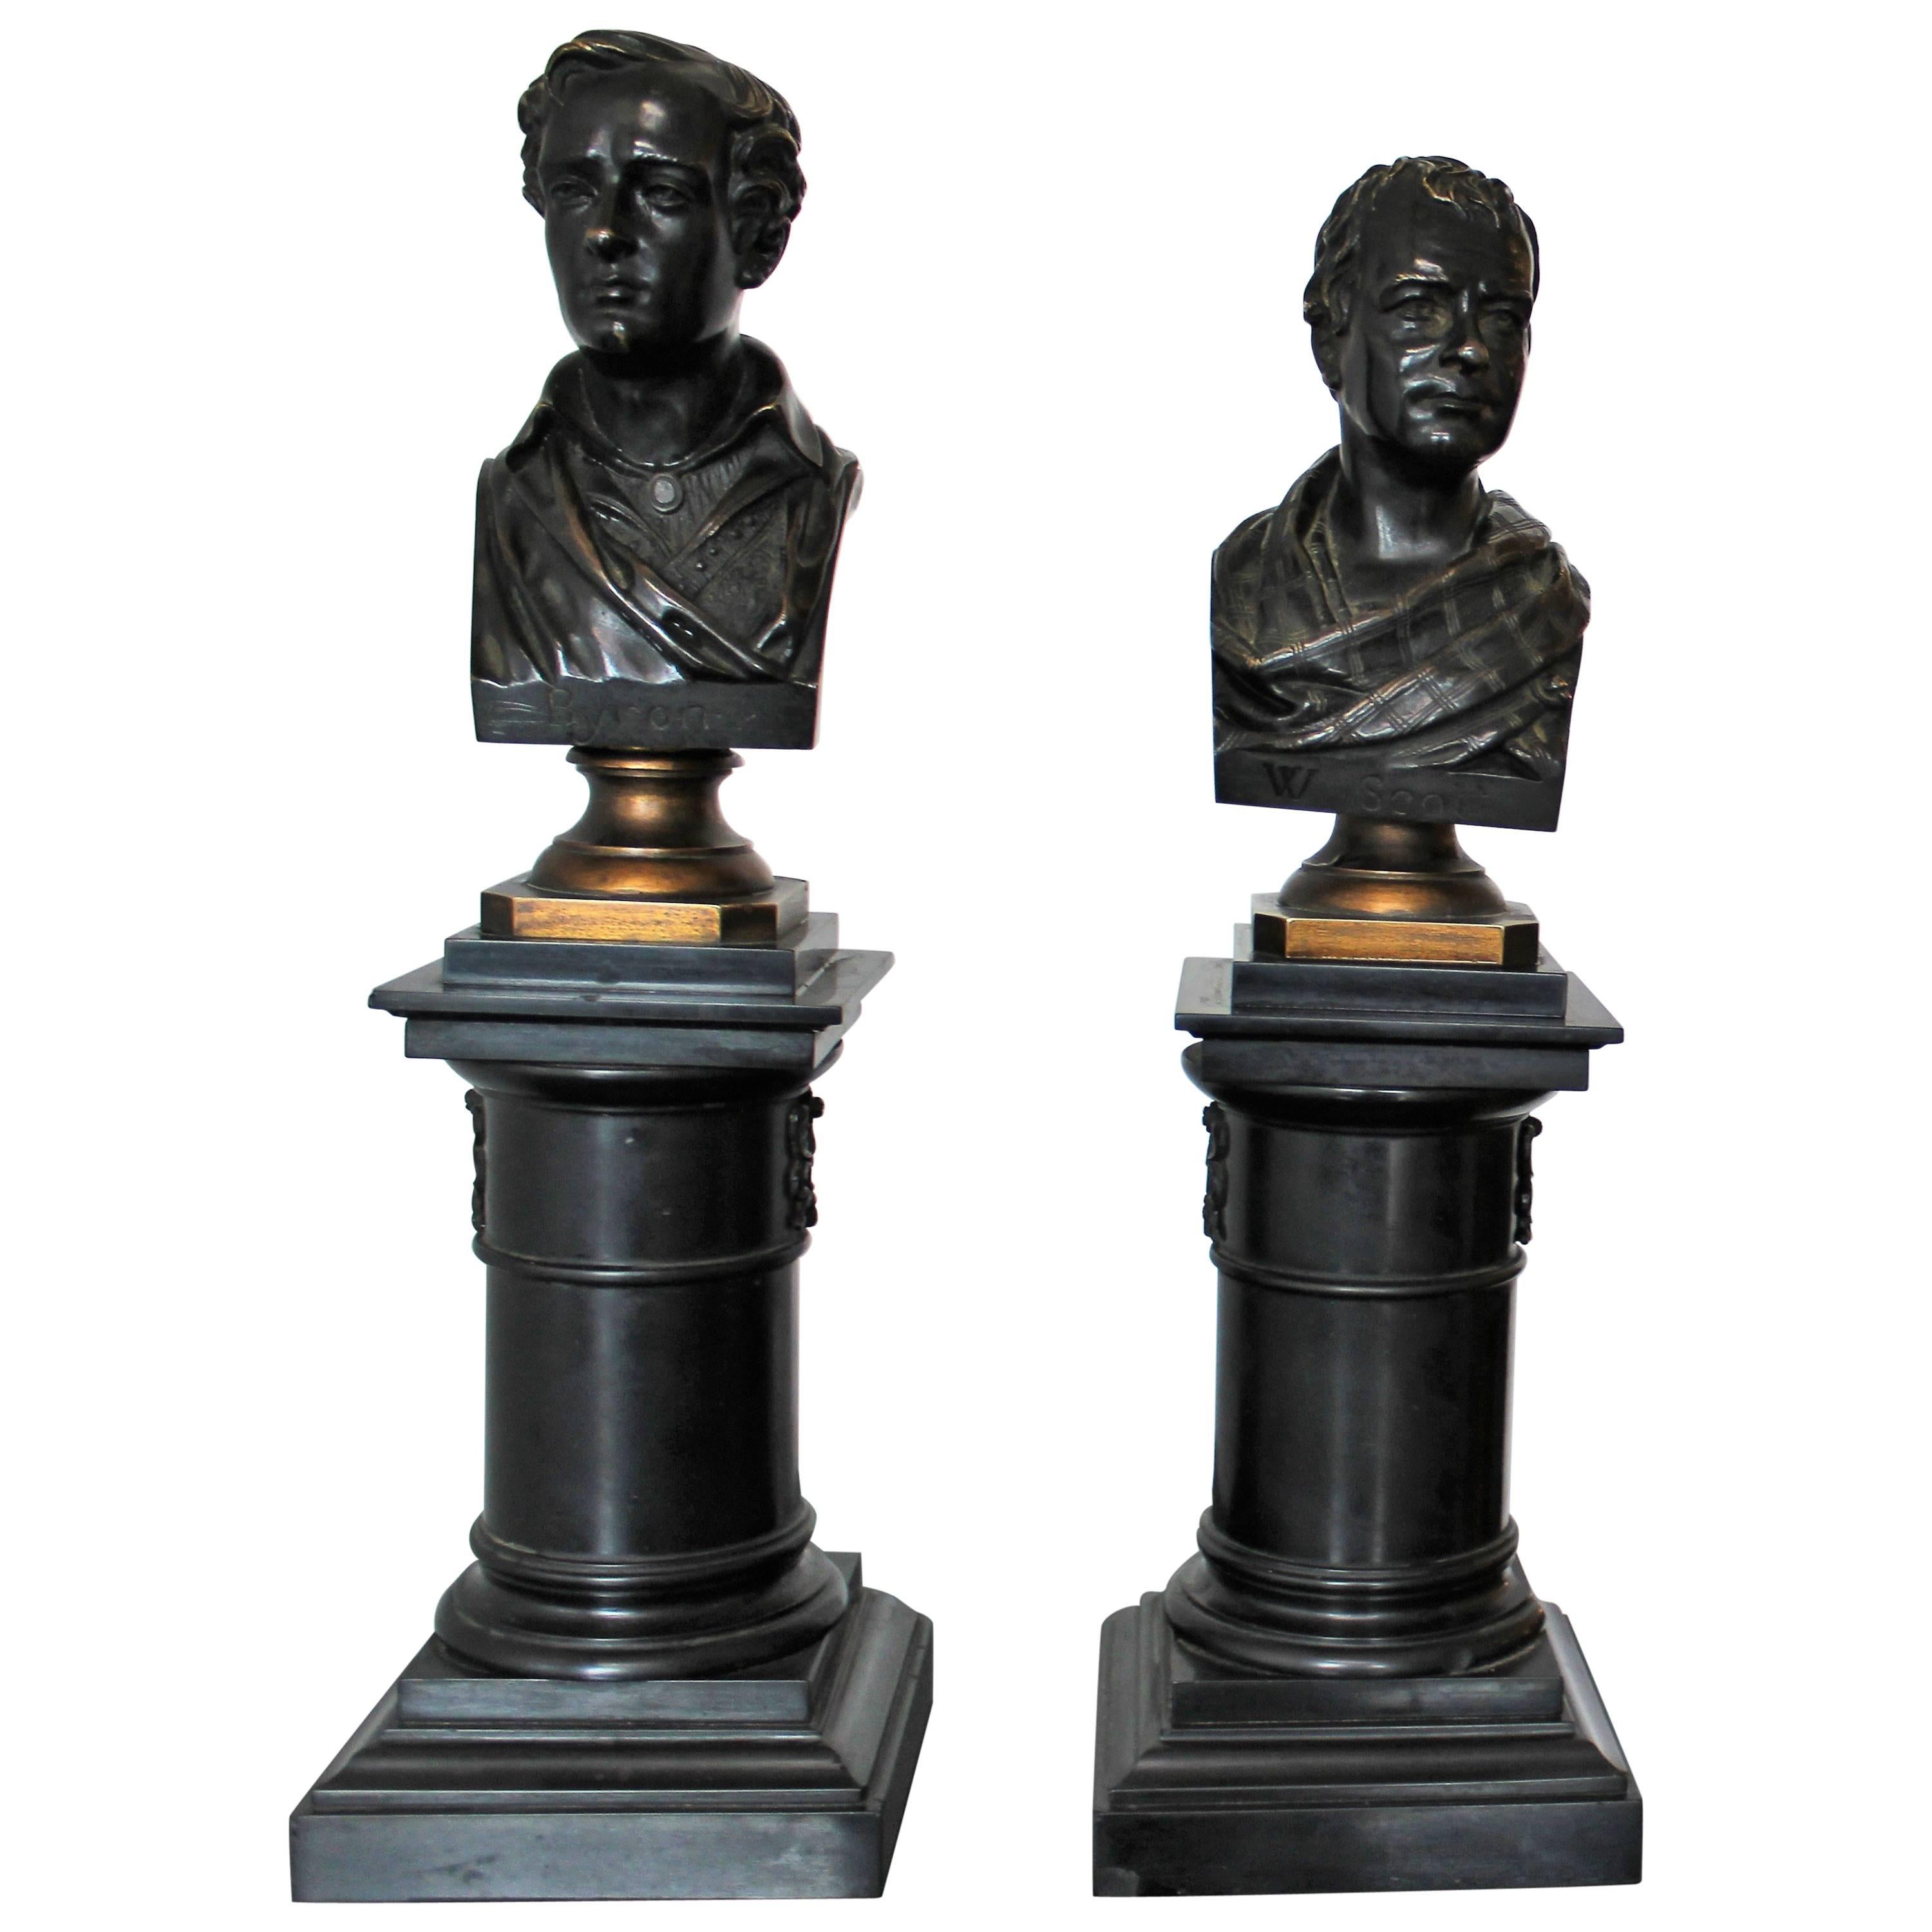 Pair of Bronze Busts on Marble Columns of Sir Walter Scott and Lord Byron